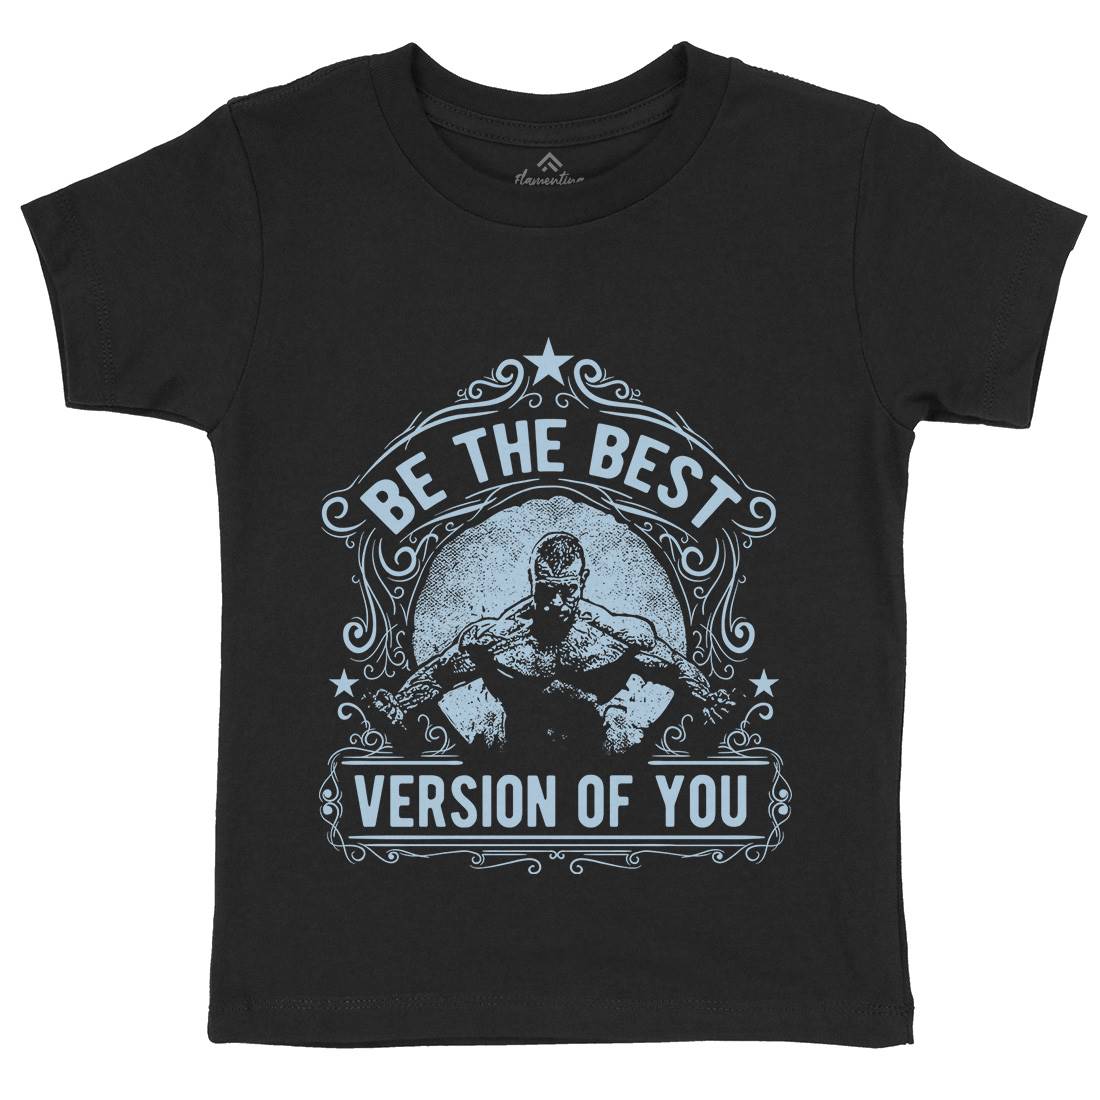 The Best Version Of You Kids Crew Neck T-Shirt Gym C985